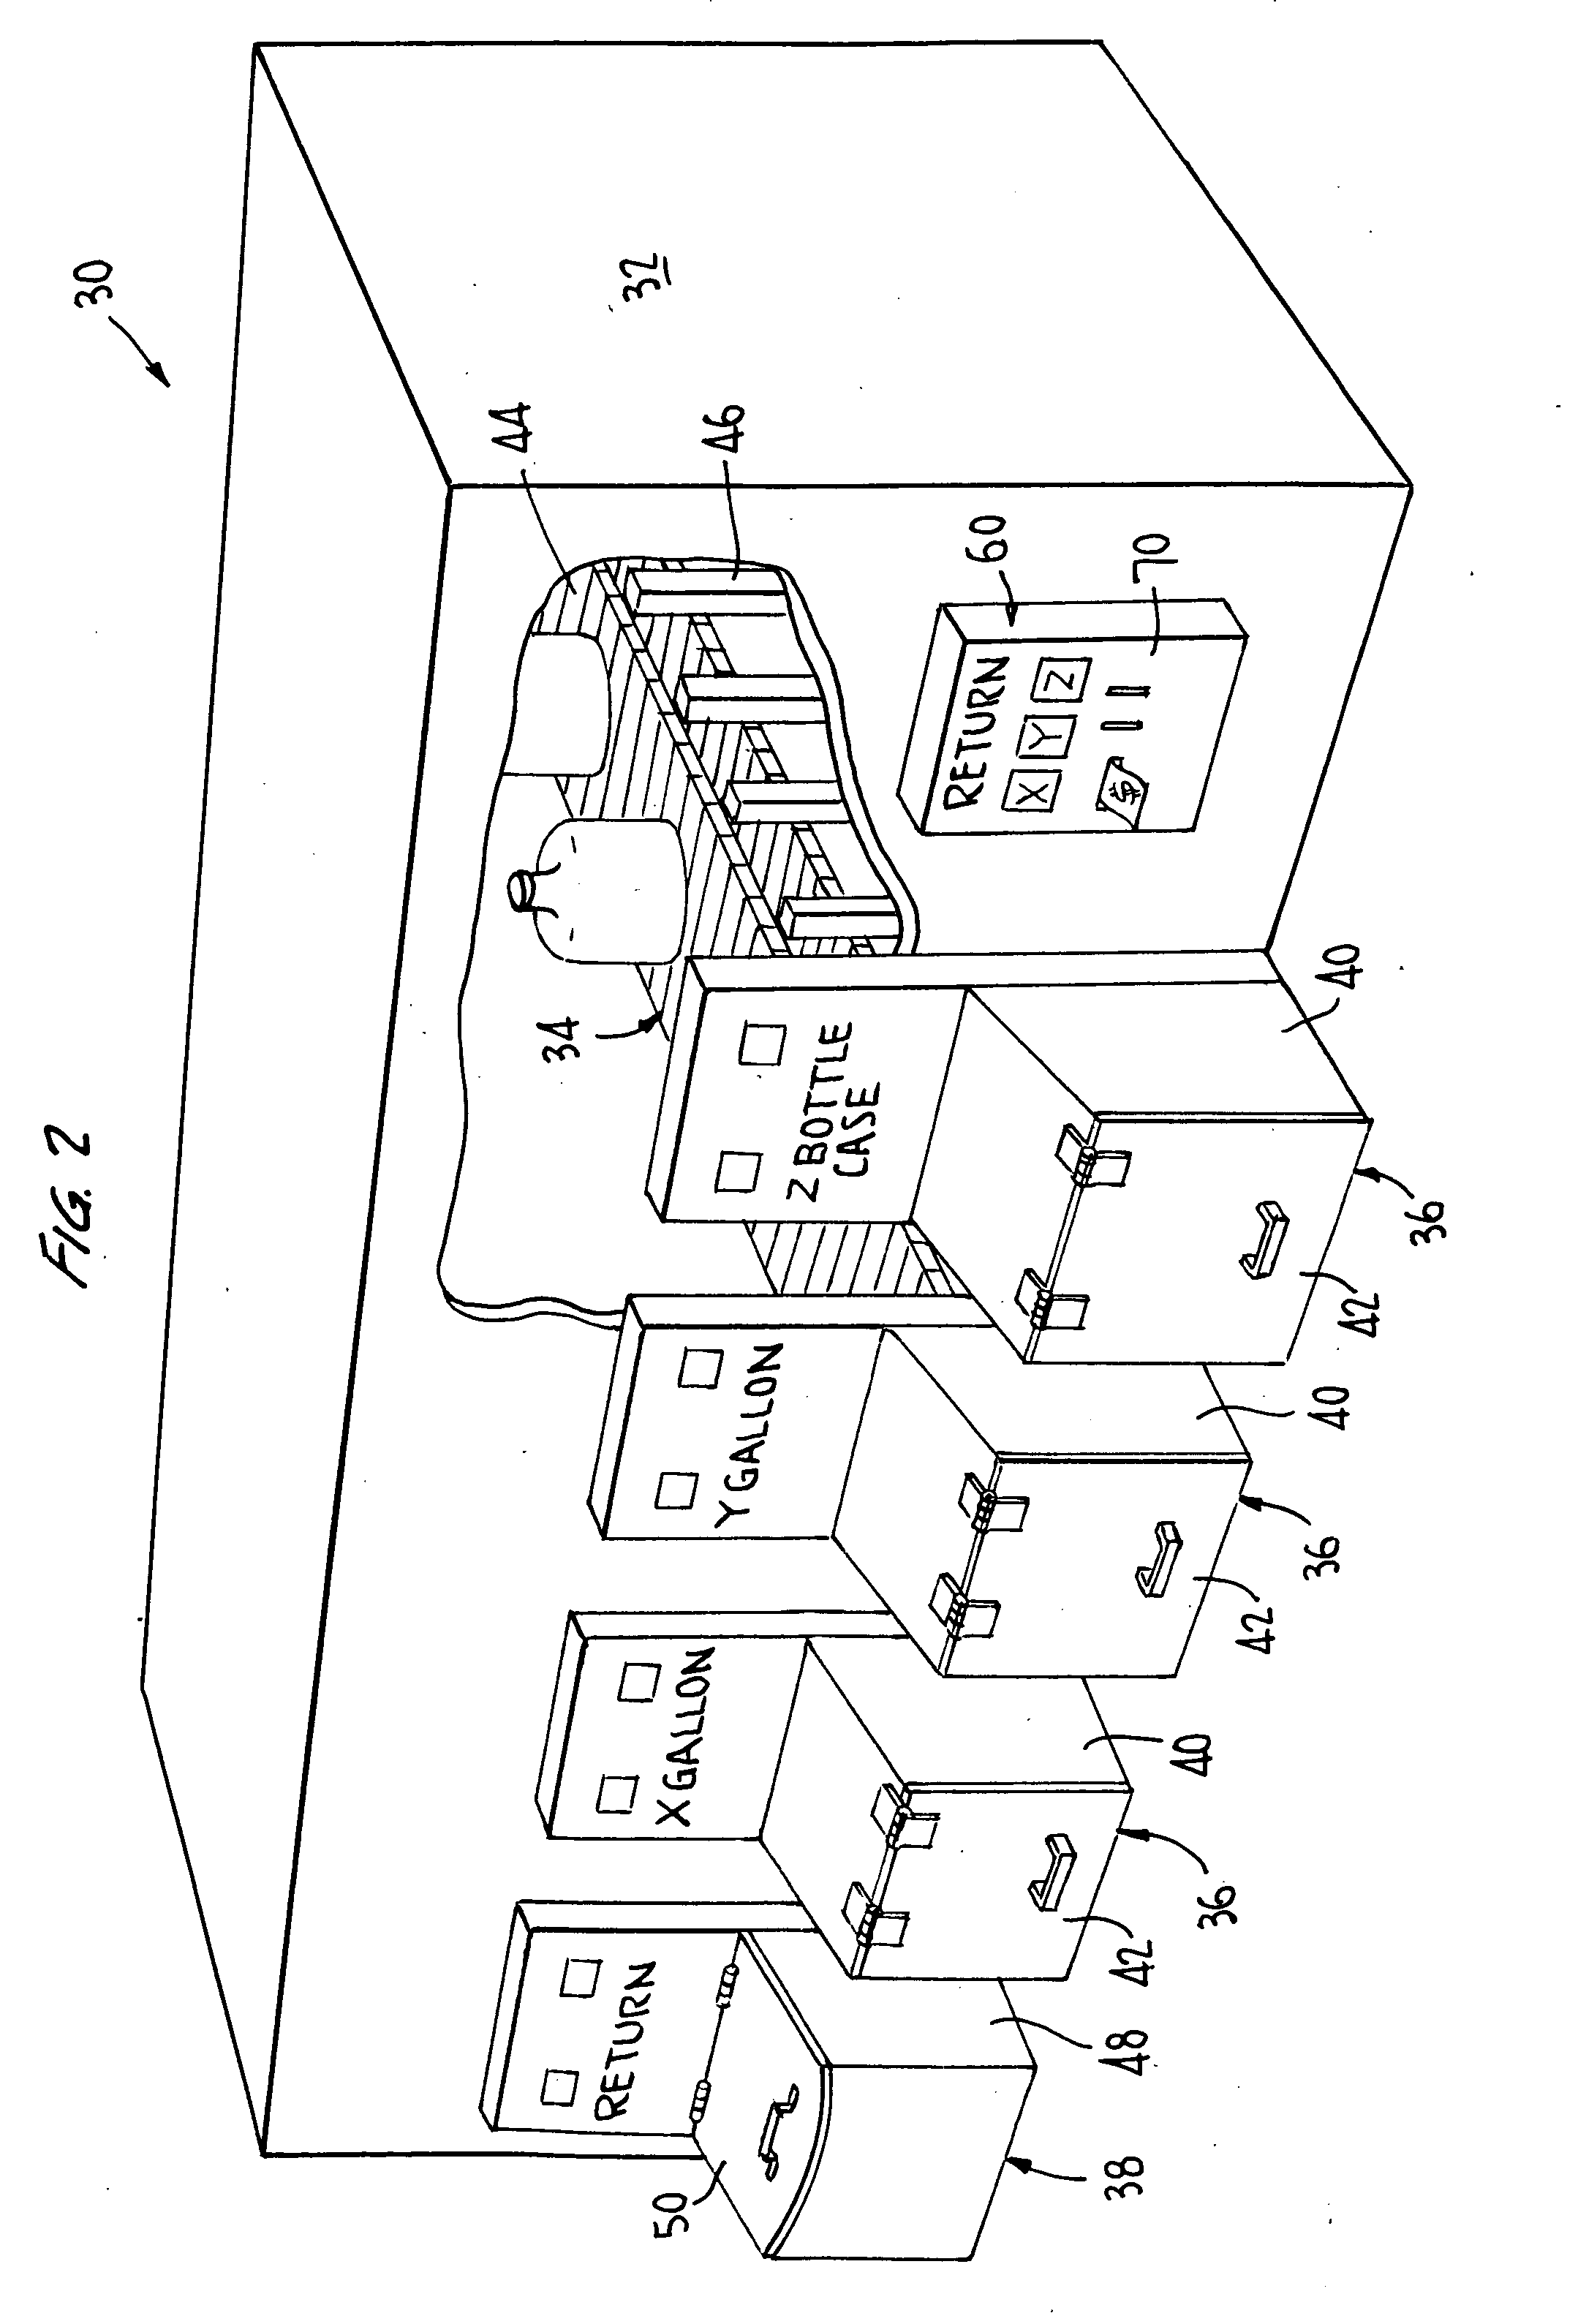 Dispensing apparatus system and method